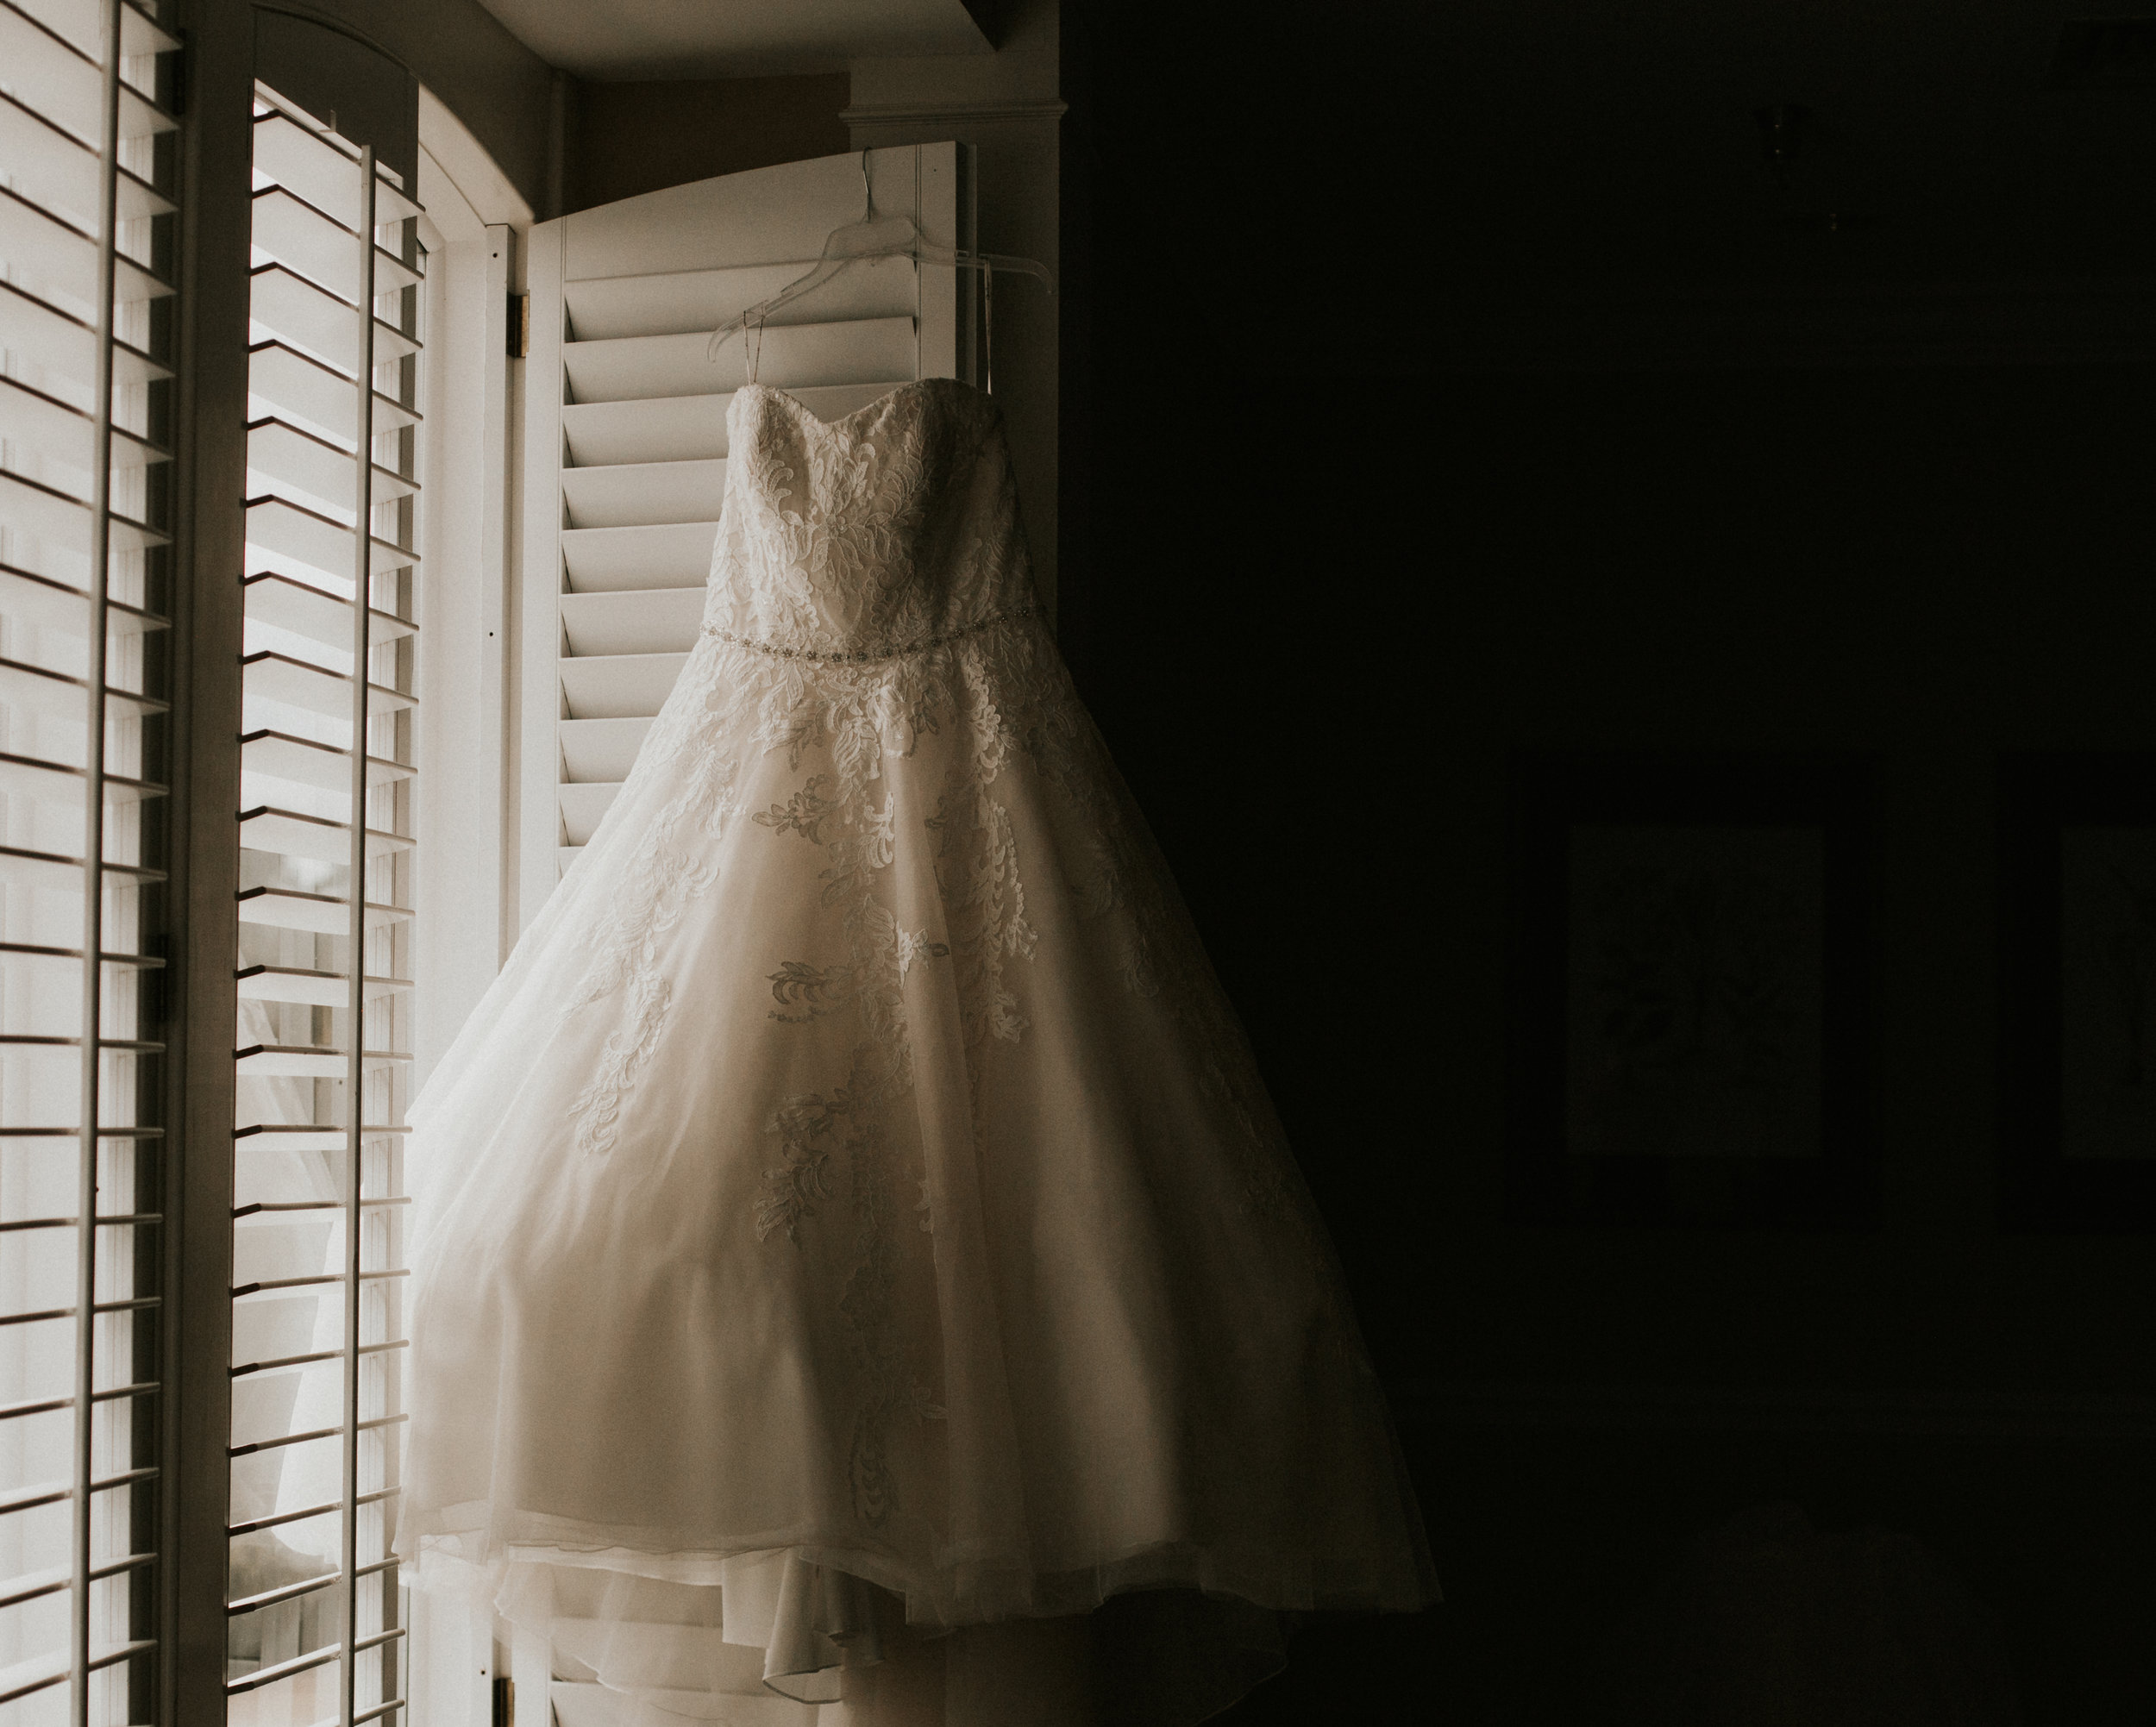  Hope Valley Country Club, Raleigh NC | Fall wedding | Sweetheart ball gown wedding dress | Marina Rey Photography 